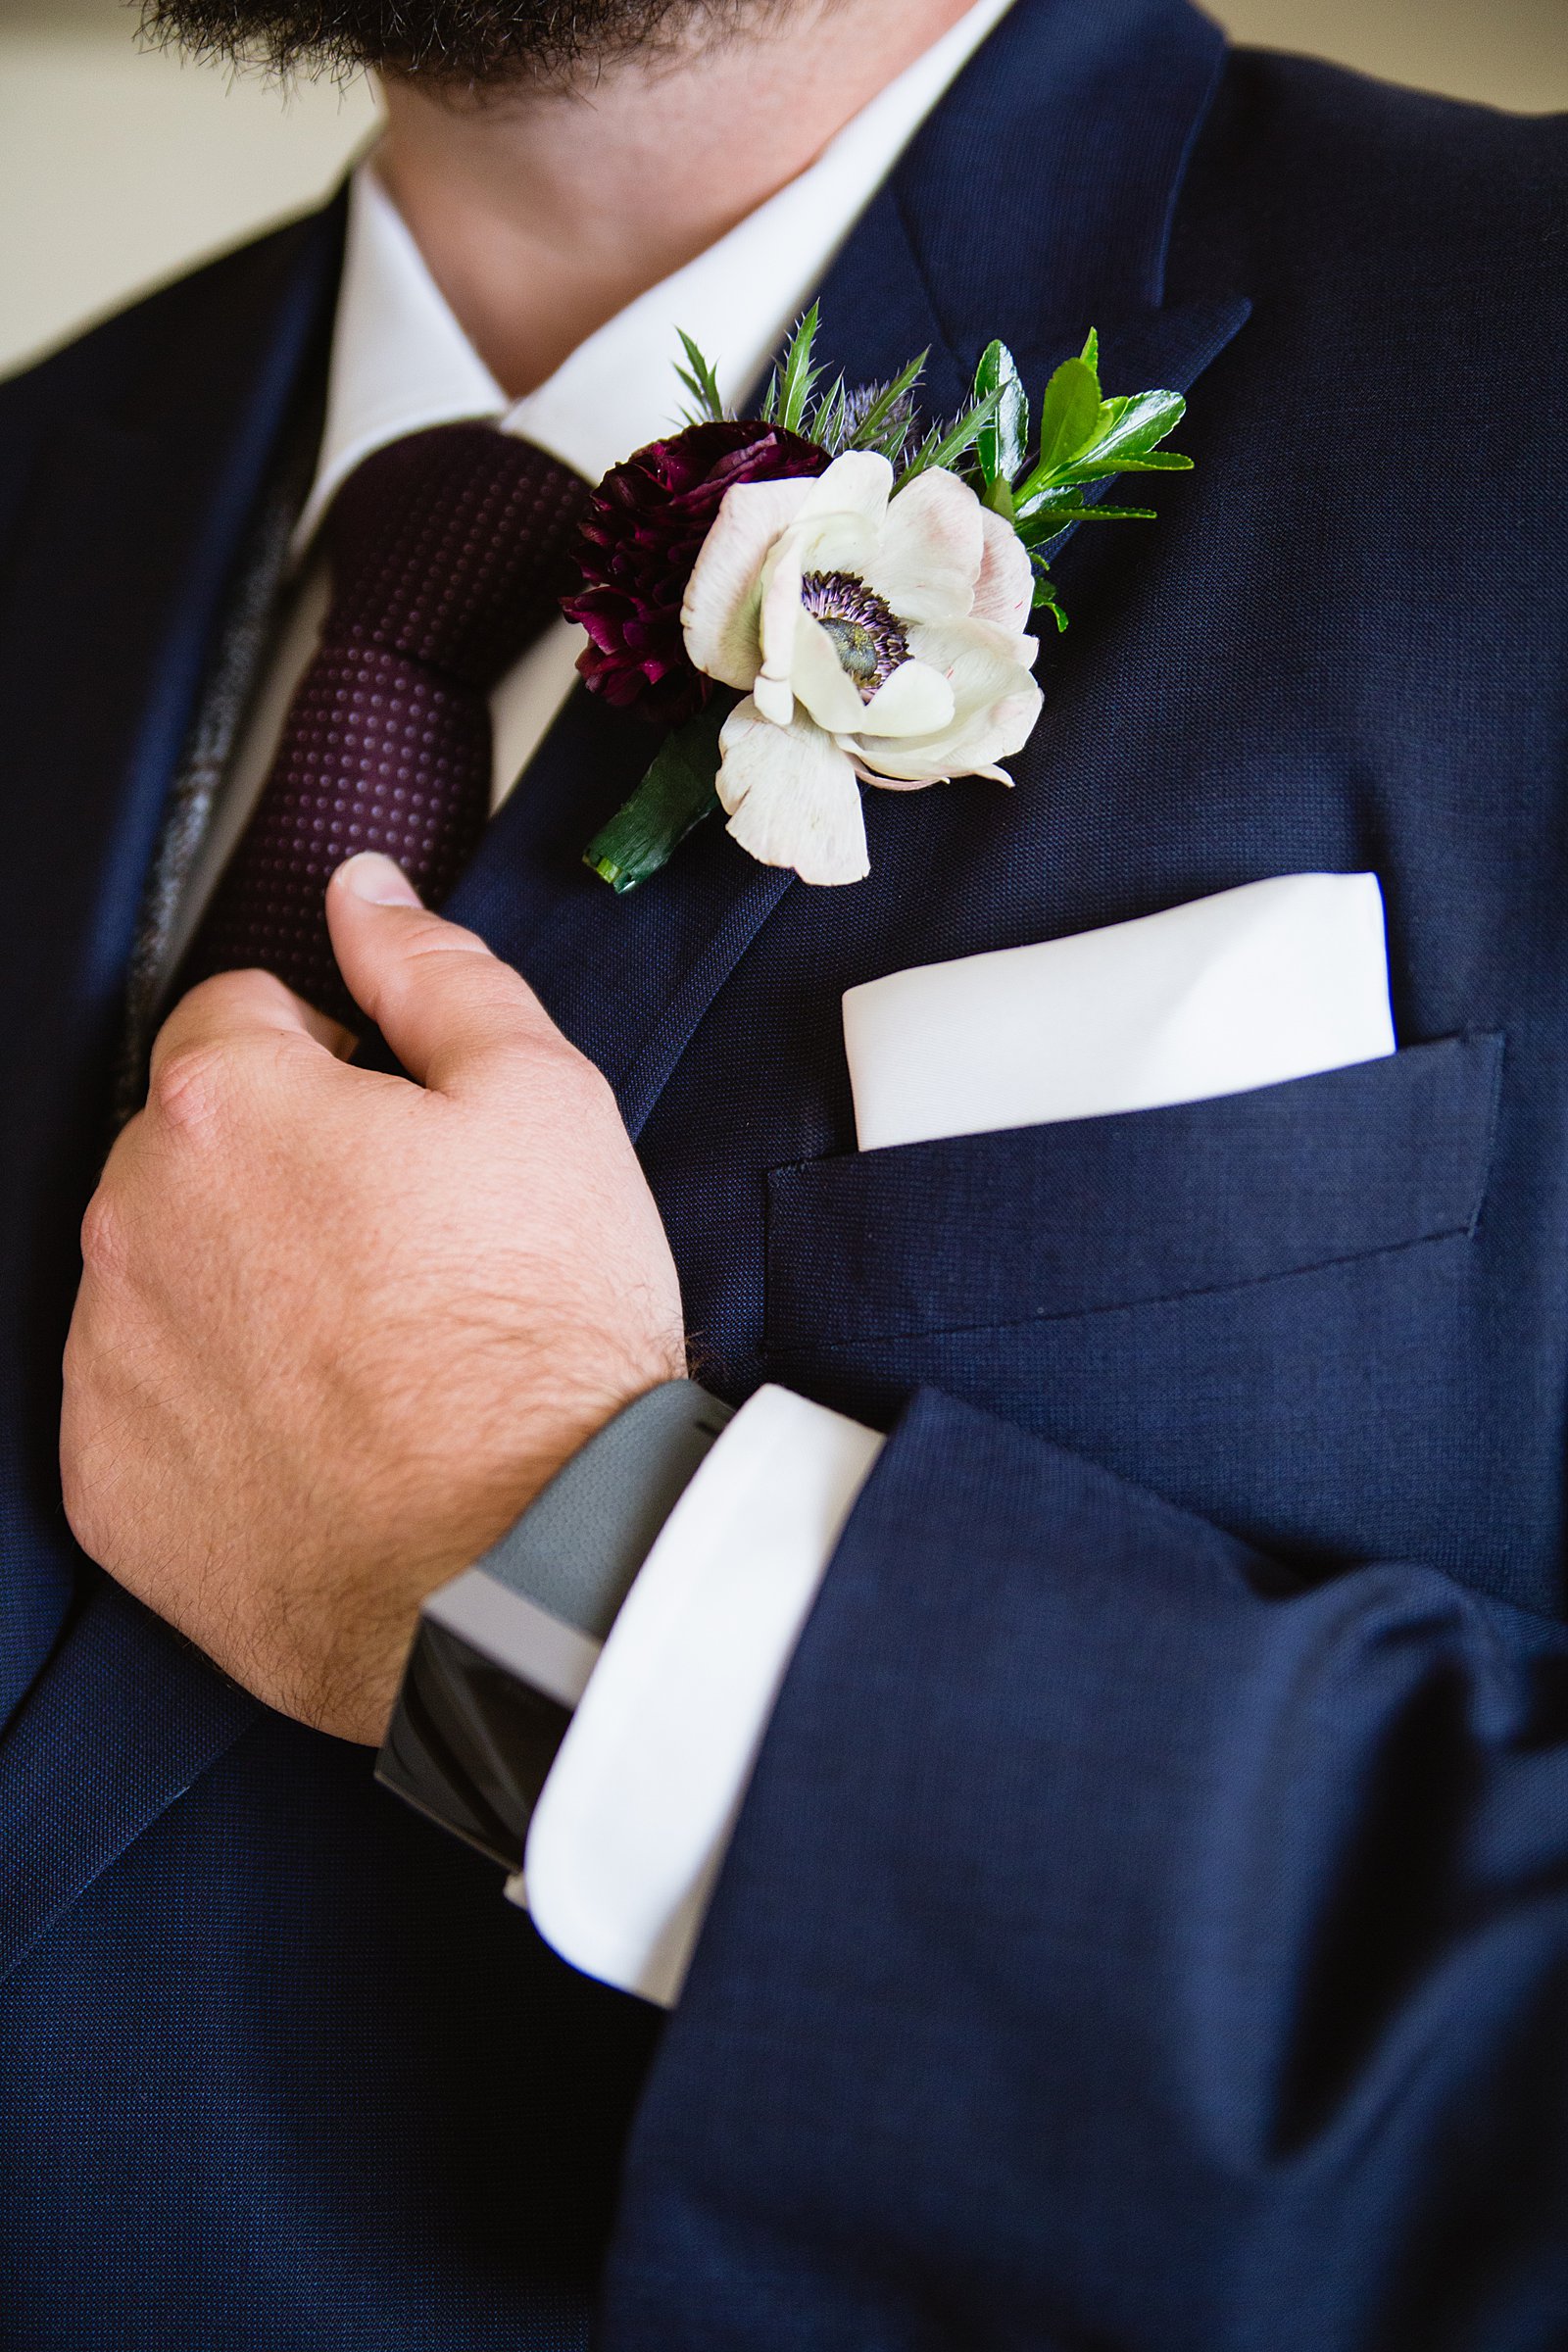 Groom's romantic white and maroon boutonniere by PMA Photography.